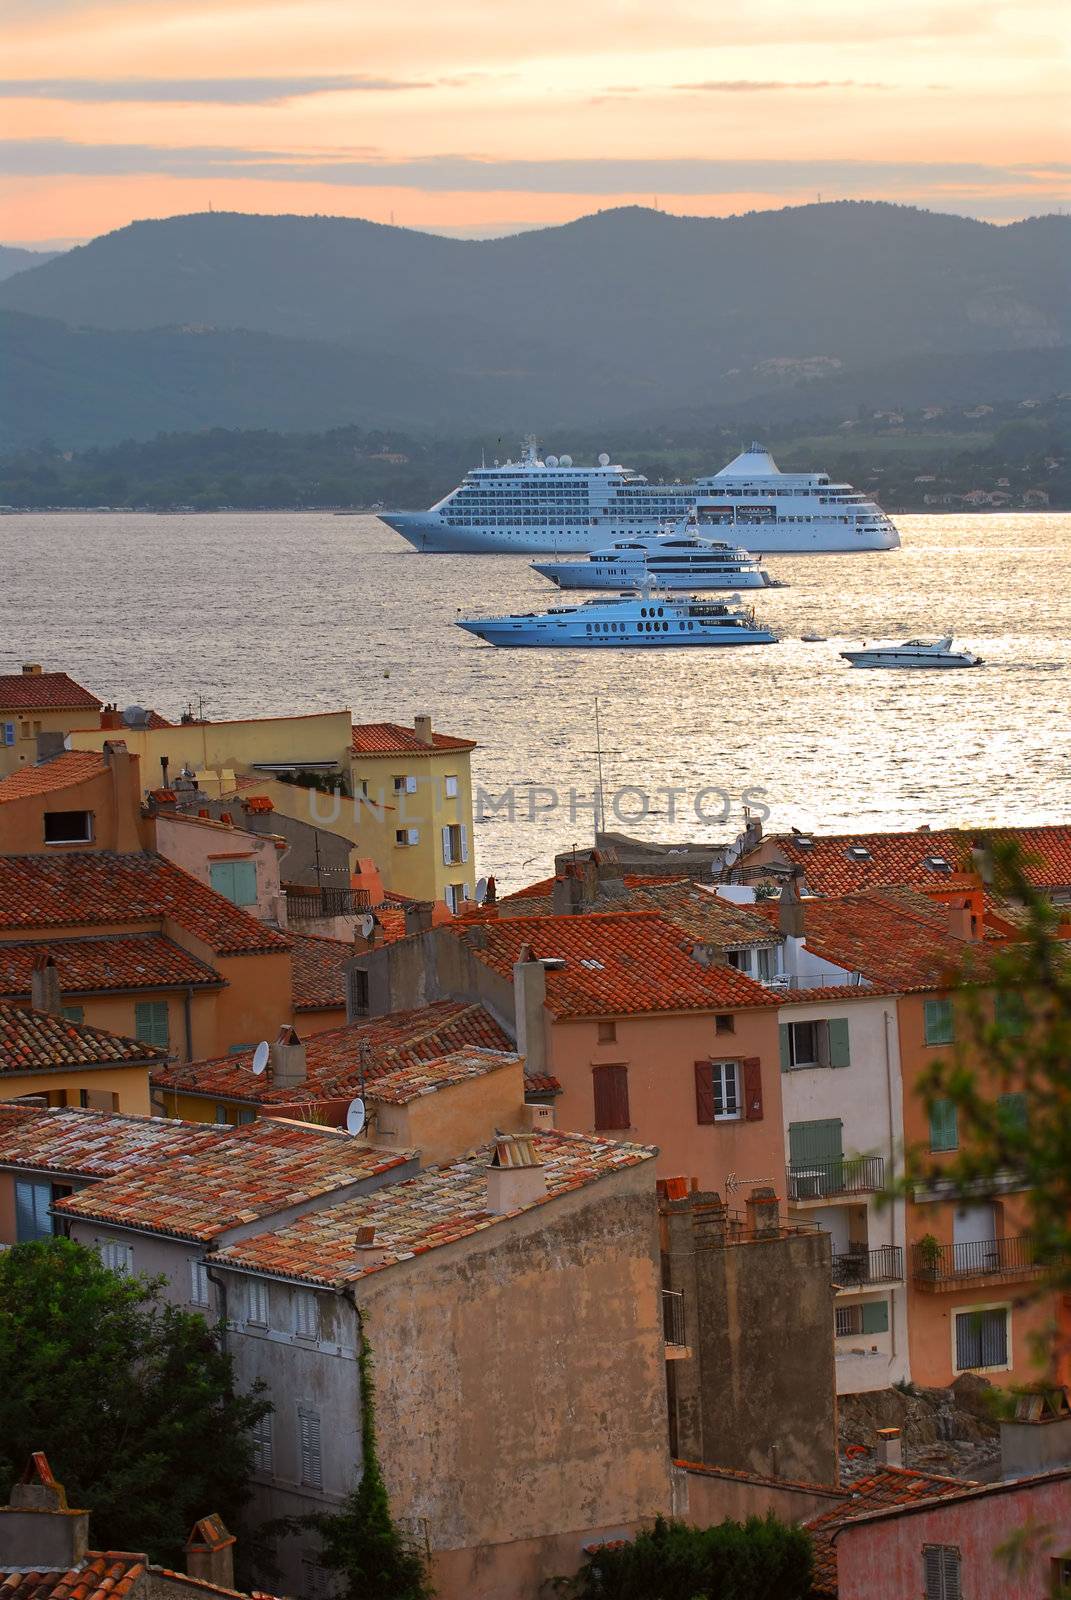 Cruise ships at St.Tropez by elenathewise